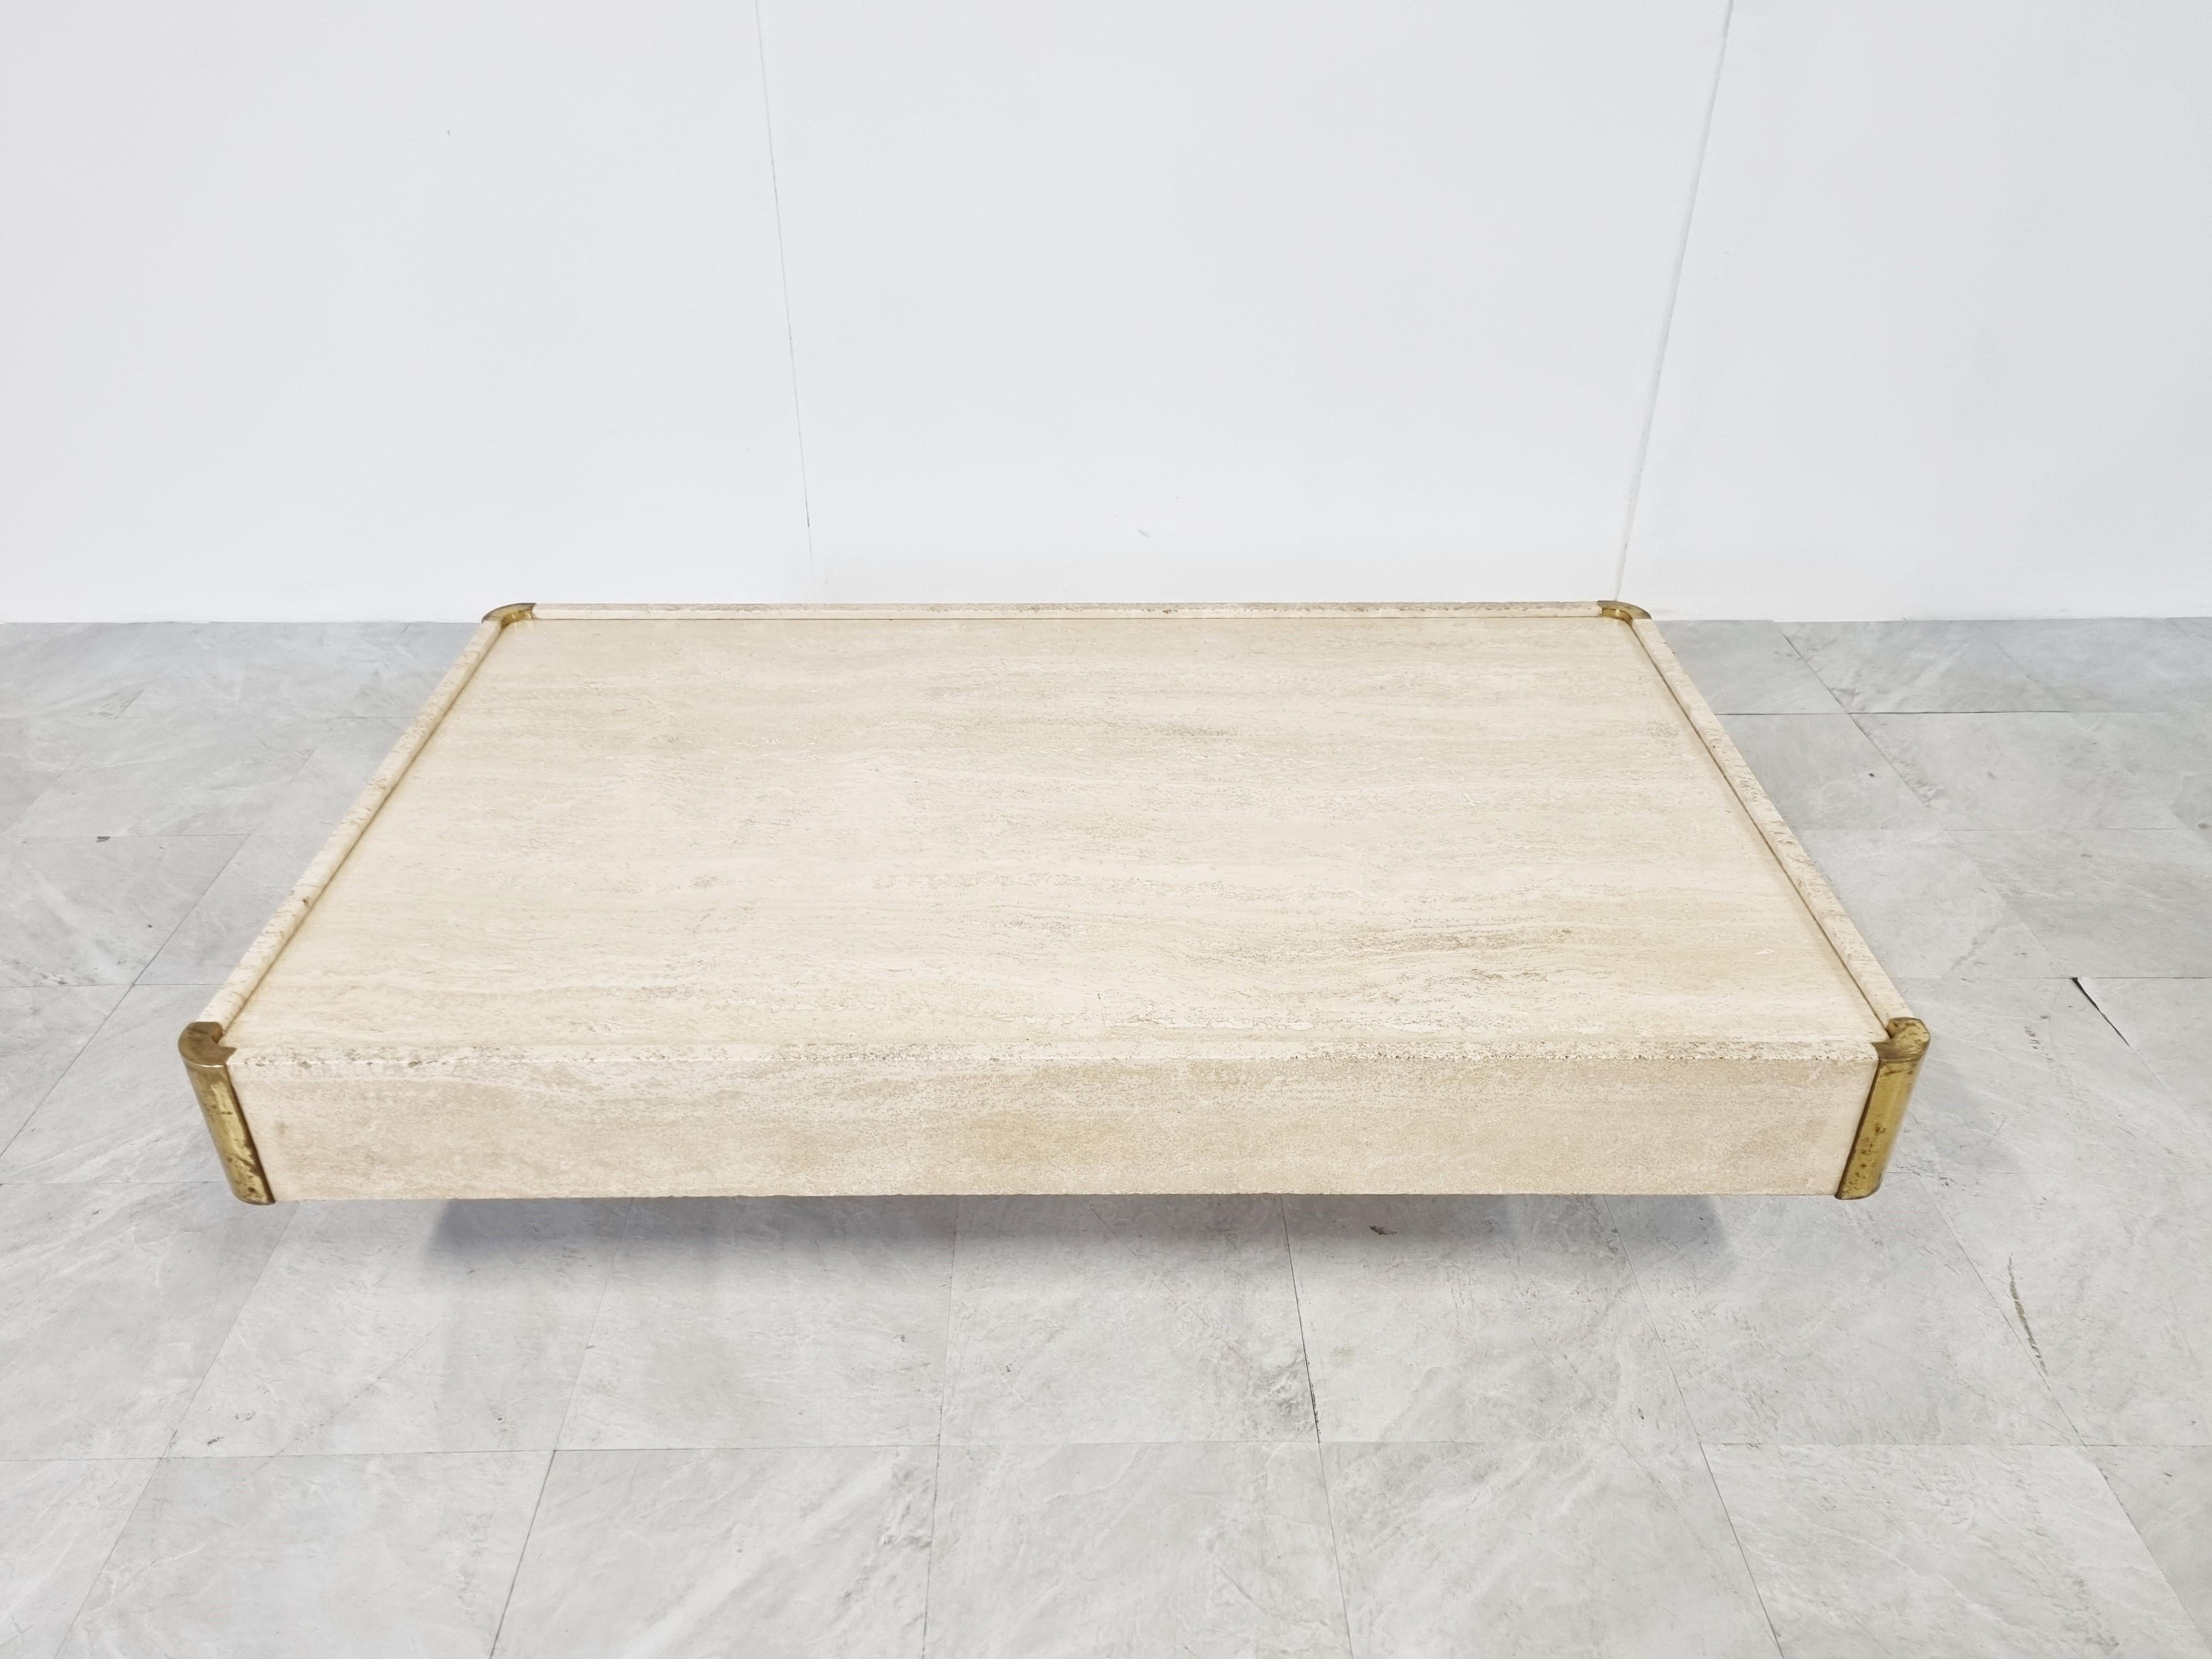 Polished travertine coffee table by Willy Rizzo with a central travertine base and brass rounded corners.

Good condition with some nice patina on the brass edges

1970s - Belgium

Dimensions
Height: 35cm/1377